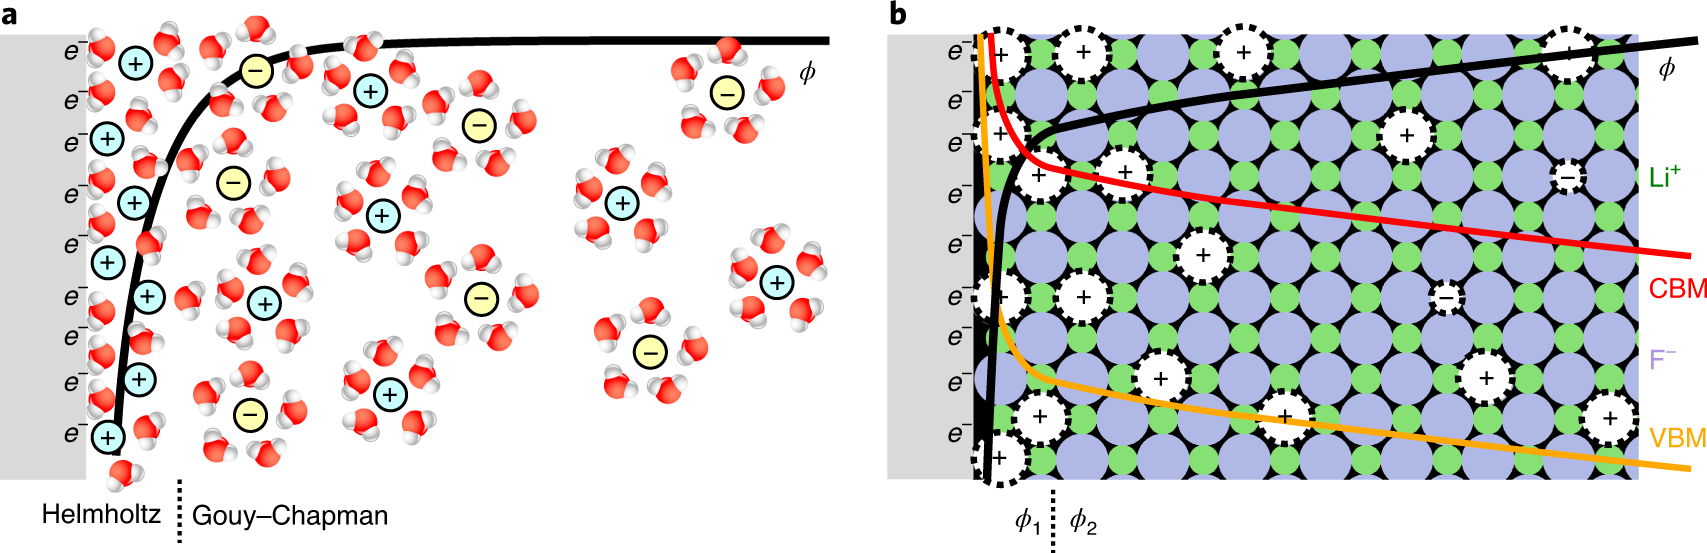 Modeling The Electrical Double Layer At Solid State Electrochemical Interfaces Nature Computational Science